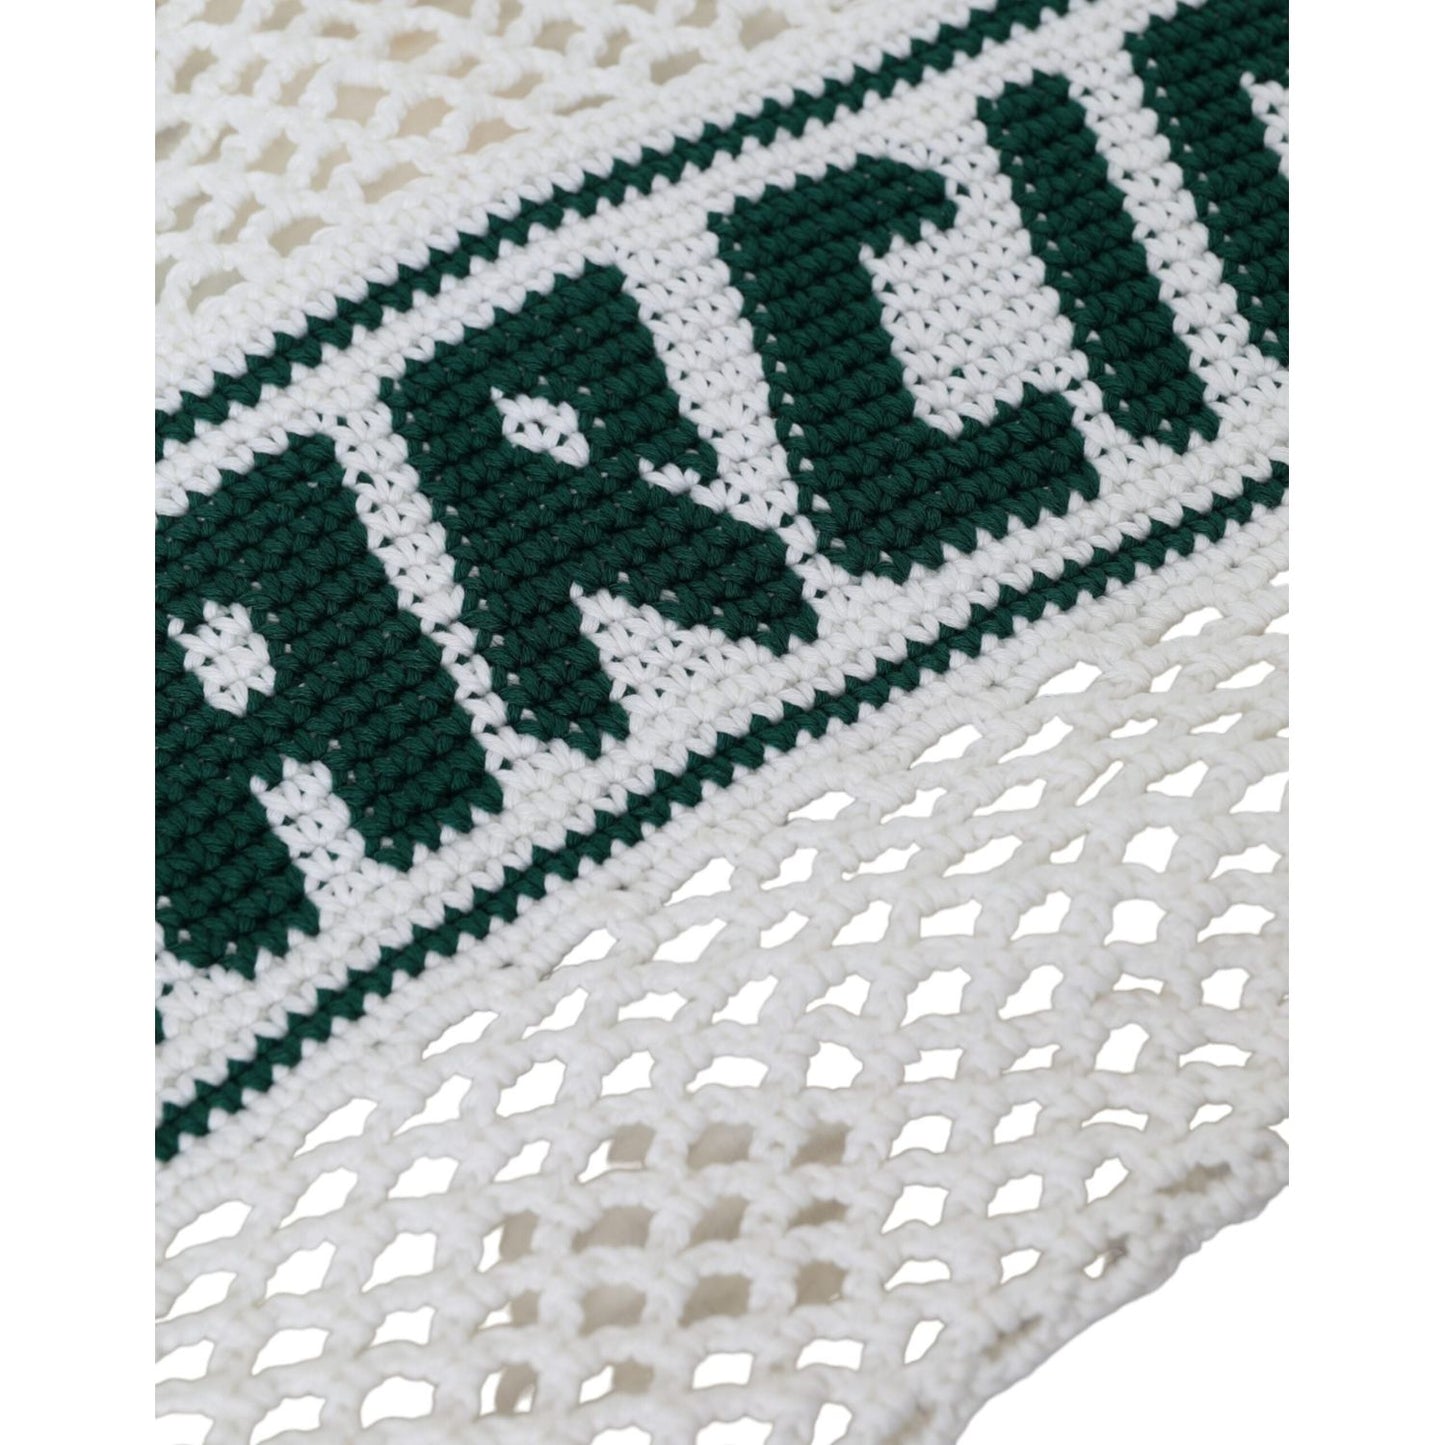 White Green Knitted Cotton Logo Shopping Tote Bag